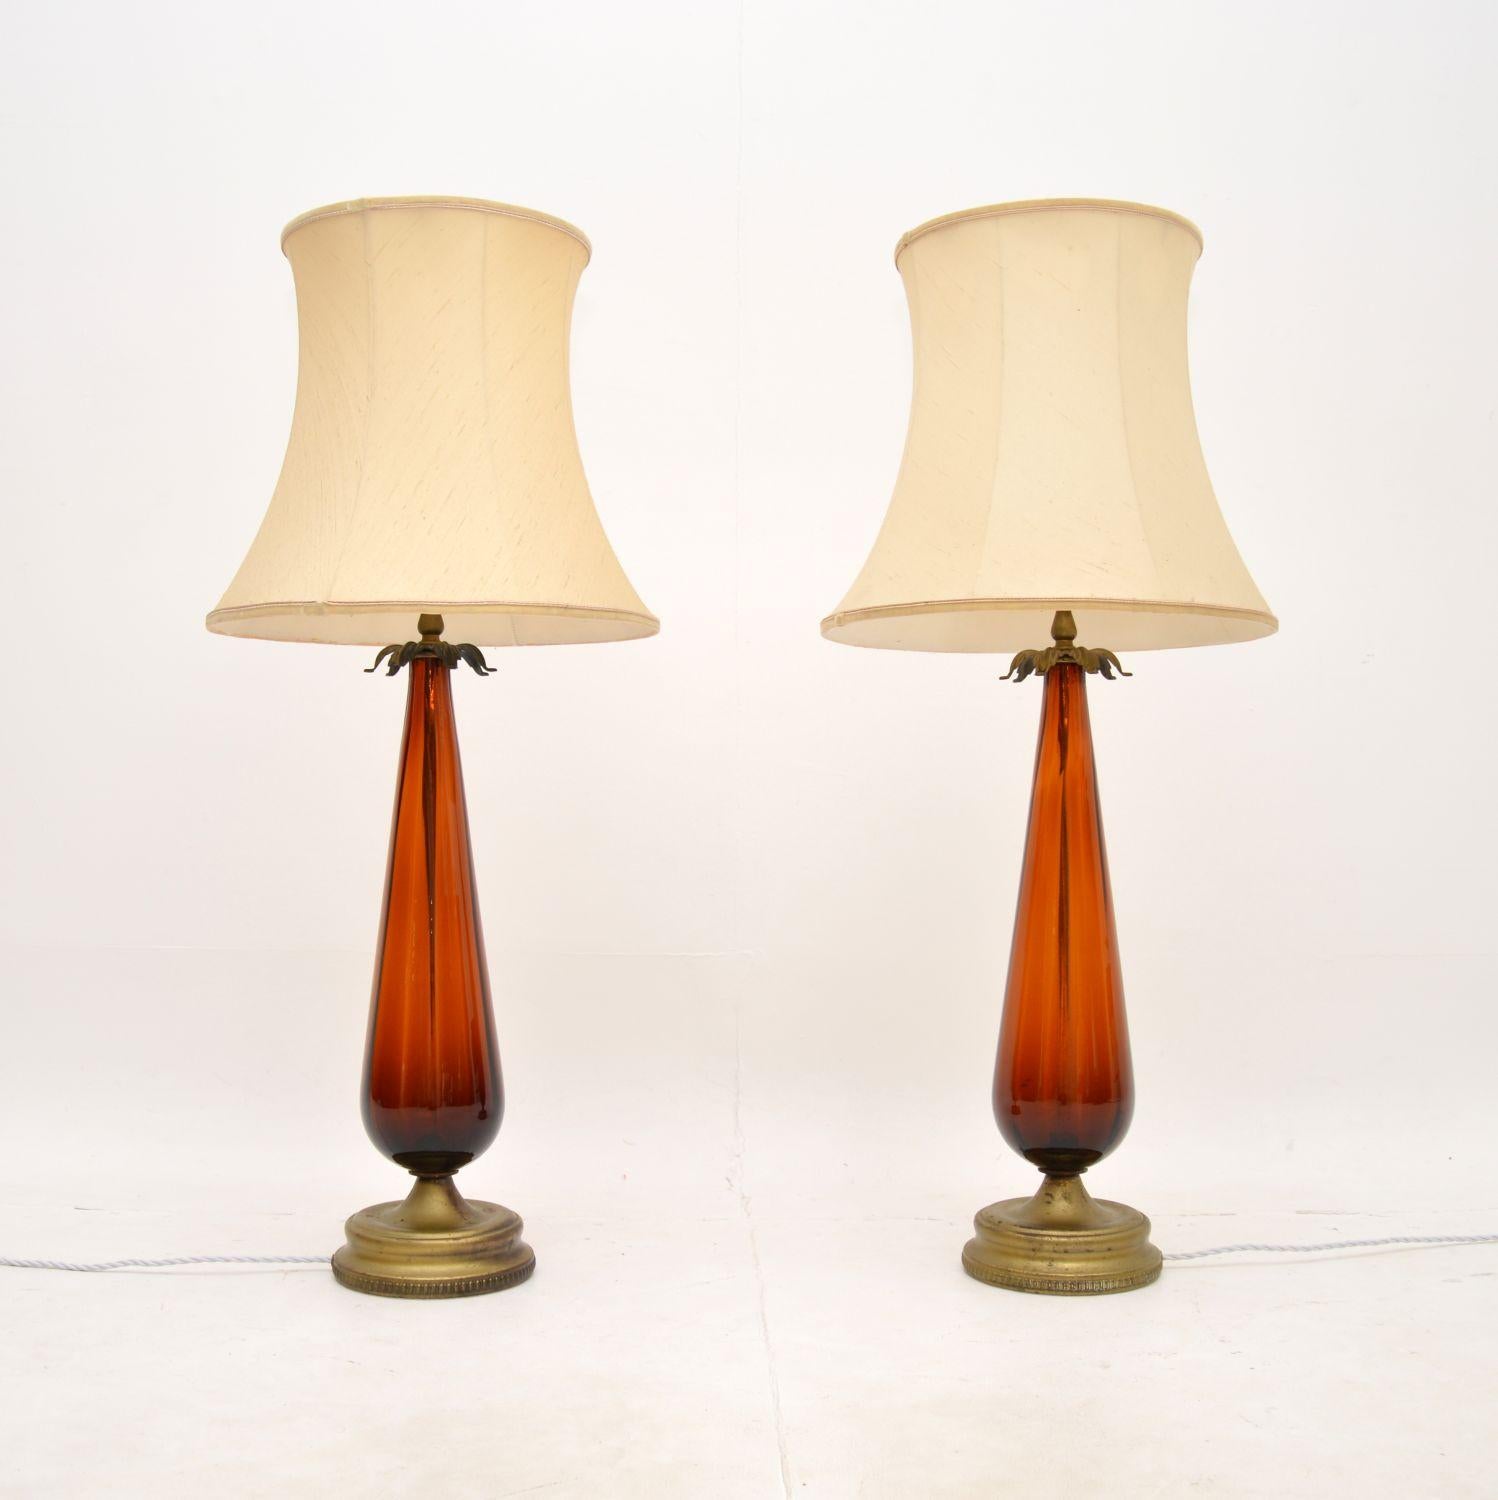 A stunning and very large pair of Art Deco glass table lamps. They were made in France, they date from around the 1920-30’s.

They are extremely impressive and are of very fine quality. They are designed in the image of aubergines, with gorgeous